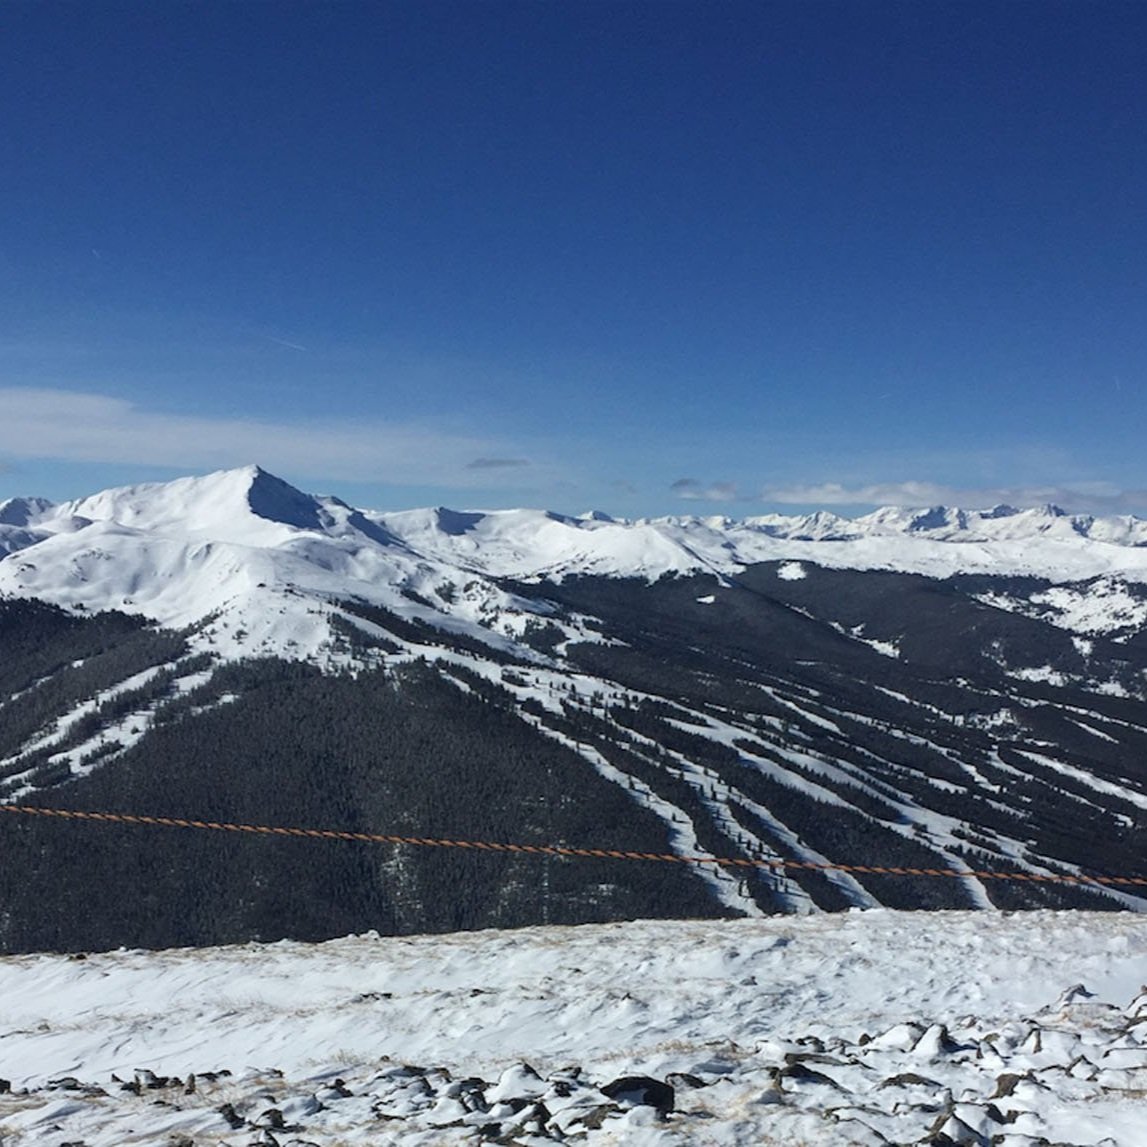 View of one of Chris Olson's favorite ski area in Colorado